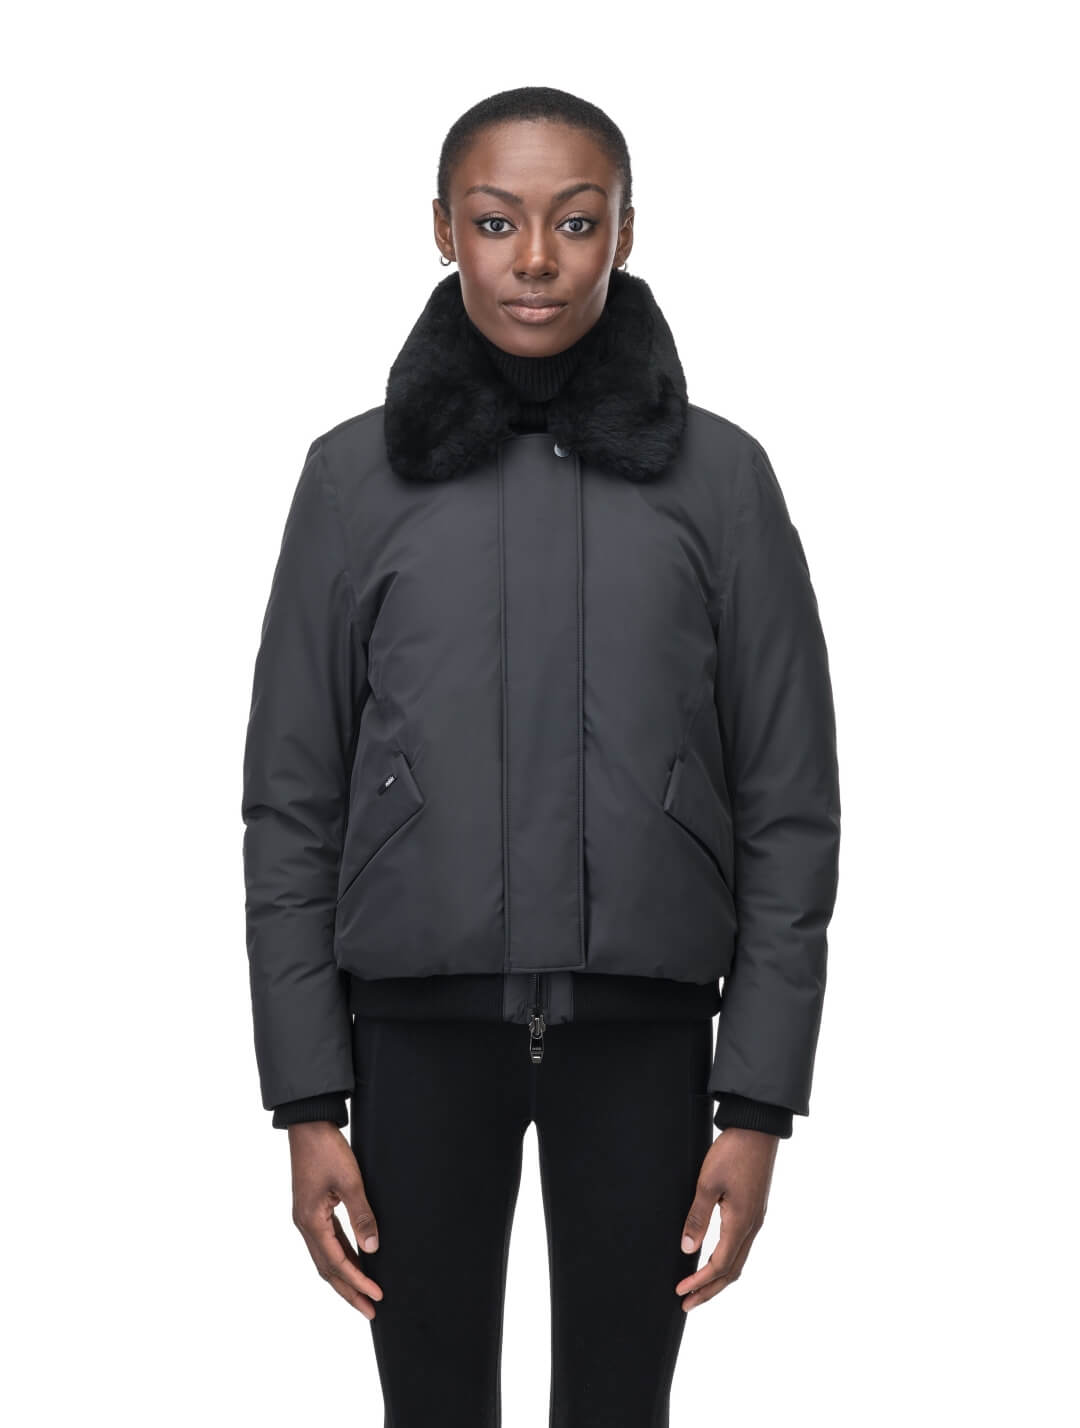 Rae Ladies Aviator Jacket in hip length, Canadian duck down insulation, removable shearling collar with hidden tuckable hood, and two-way front zipper, in Black